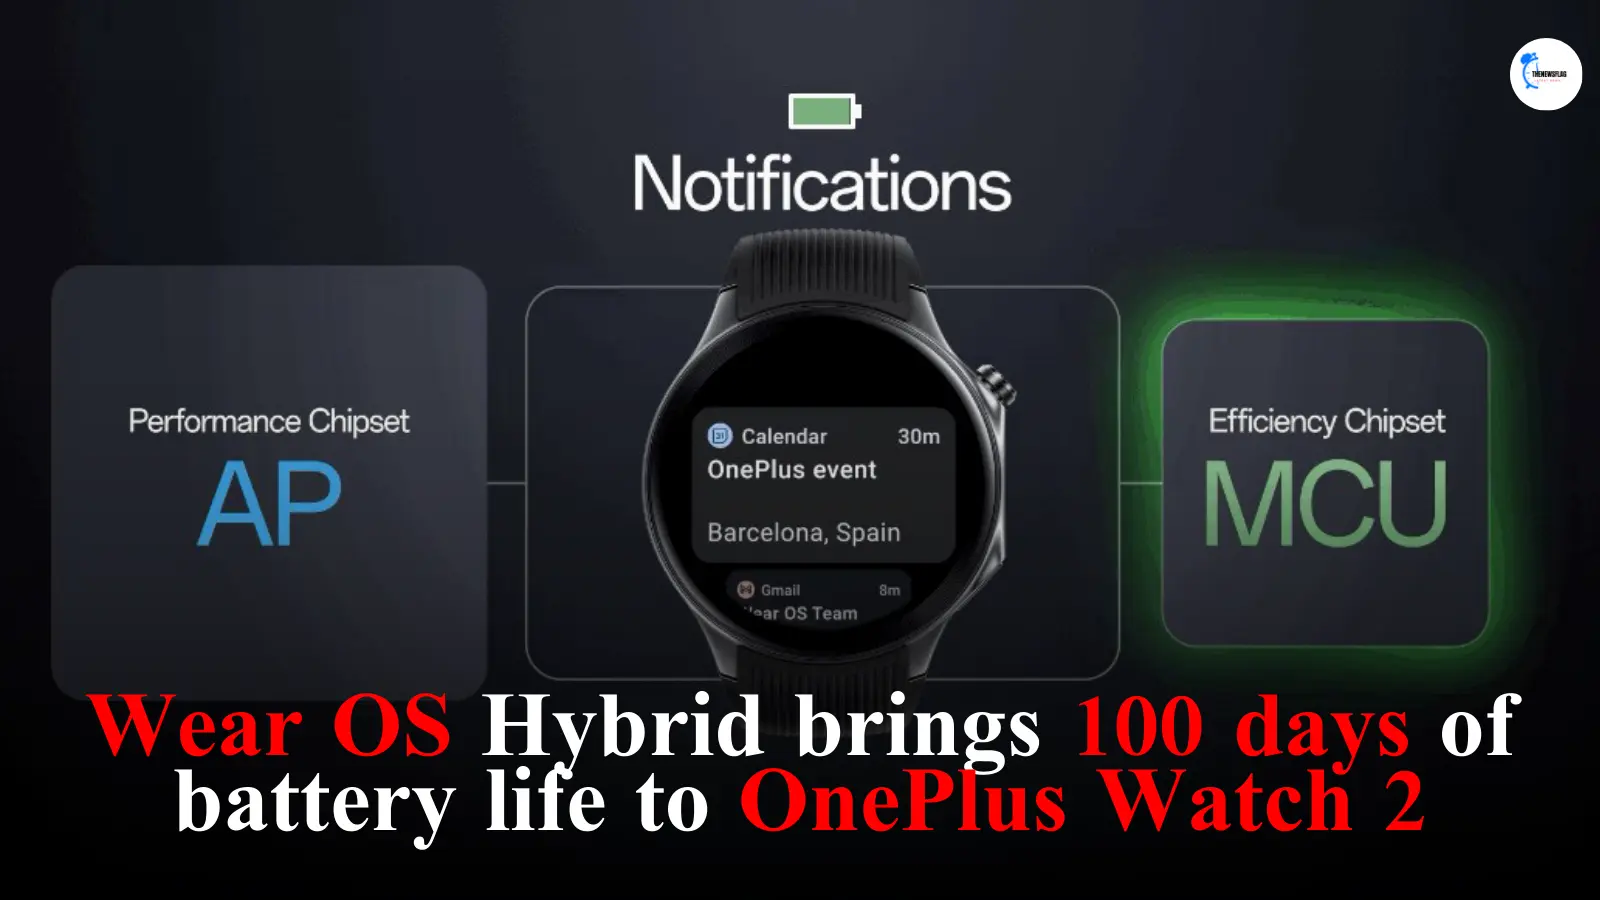 Wear OS Hybrid brings 100 days battery life to OnePlus Watch 2